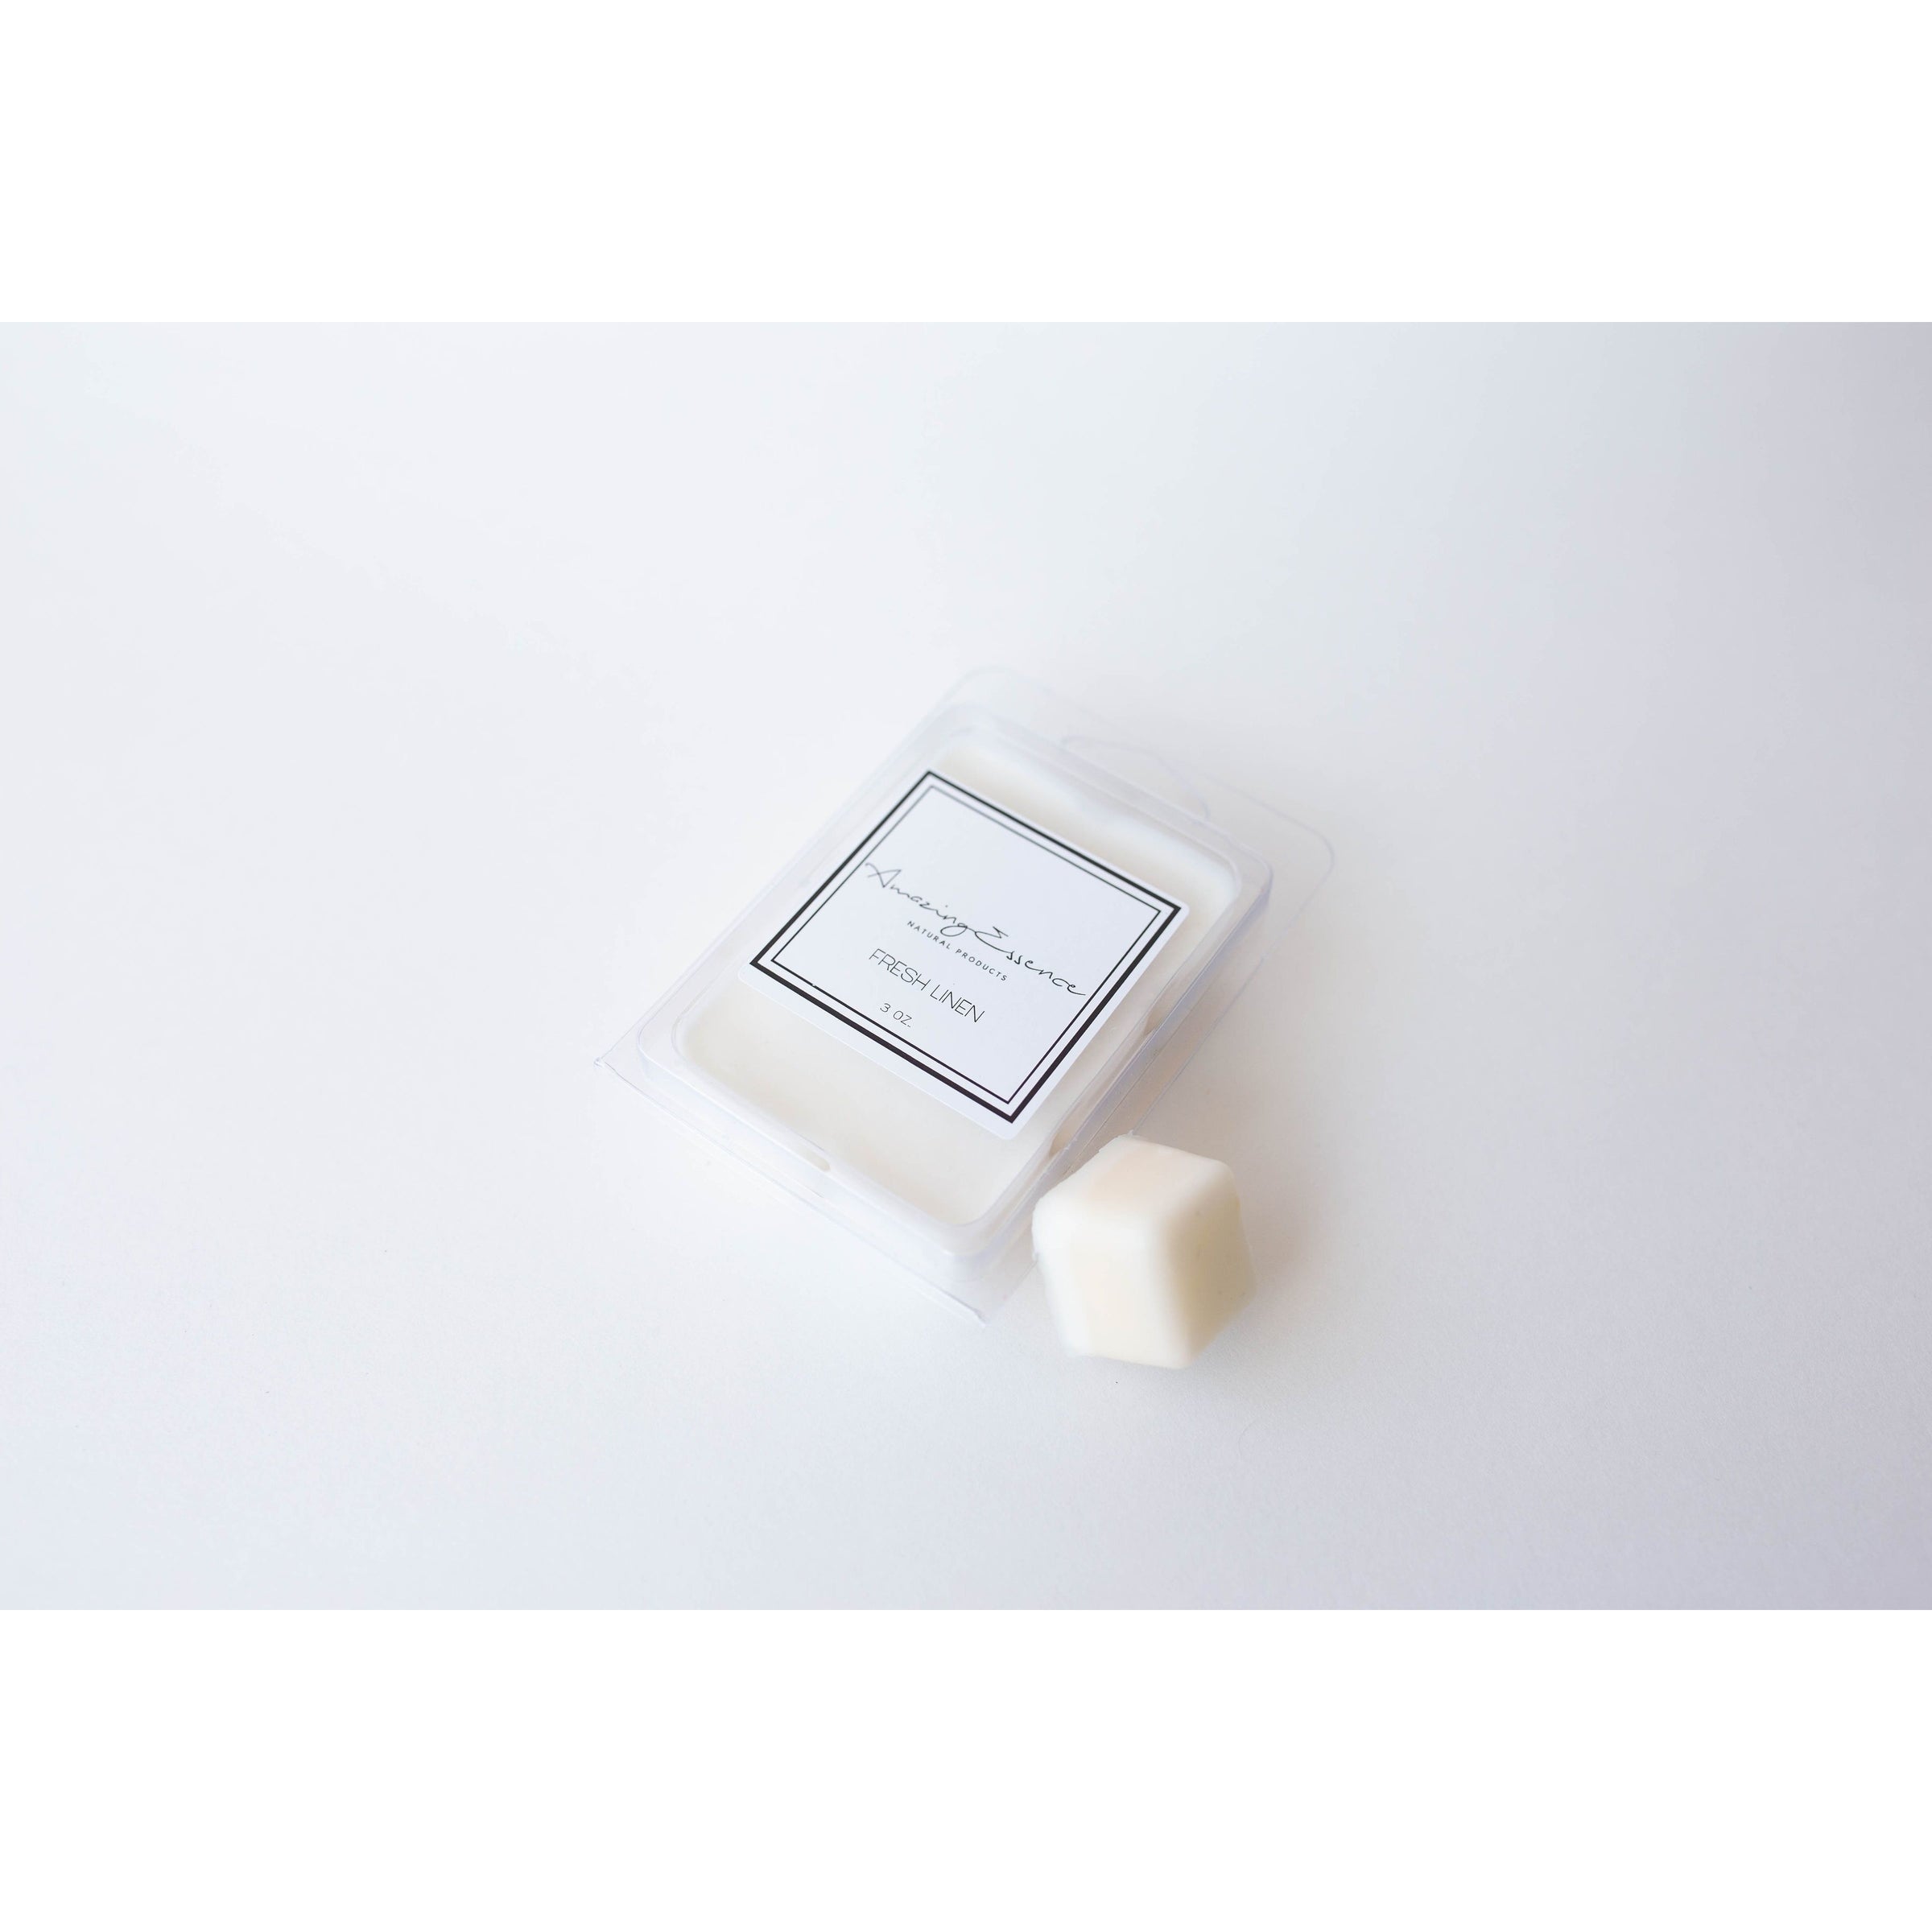 Lime & Eucalyptus Essential Oil Infused Wax Melts, Better Homes